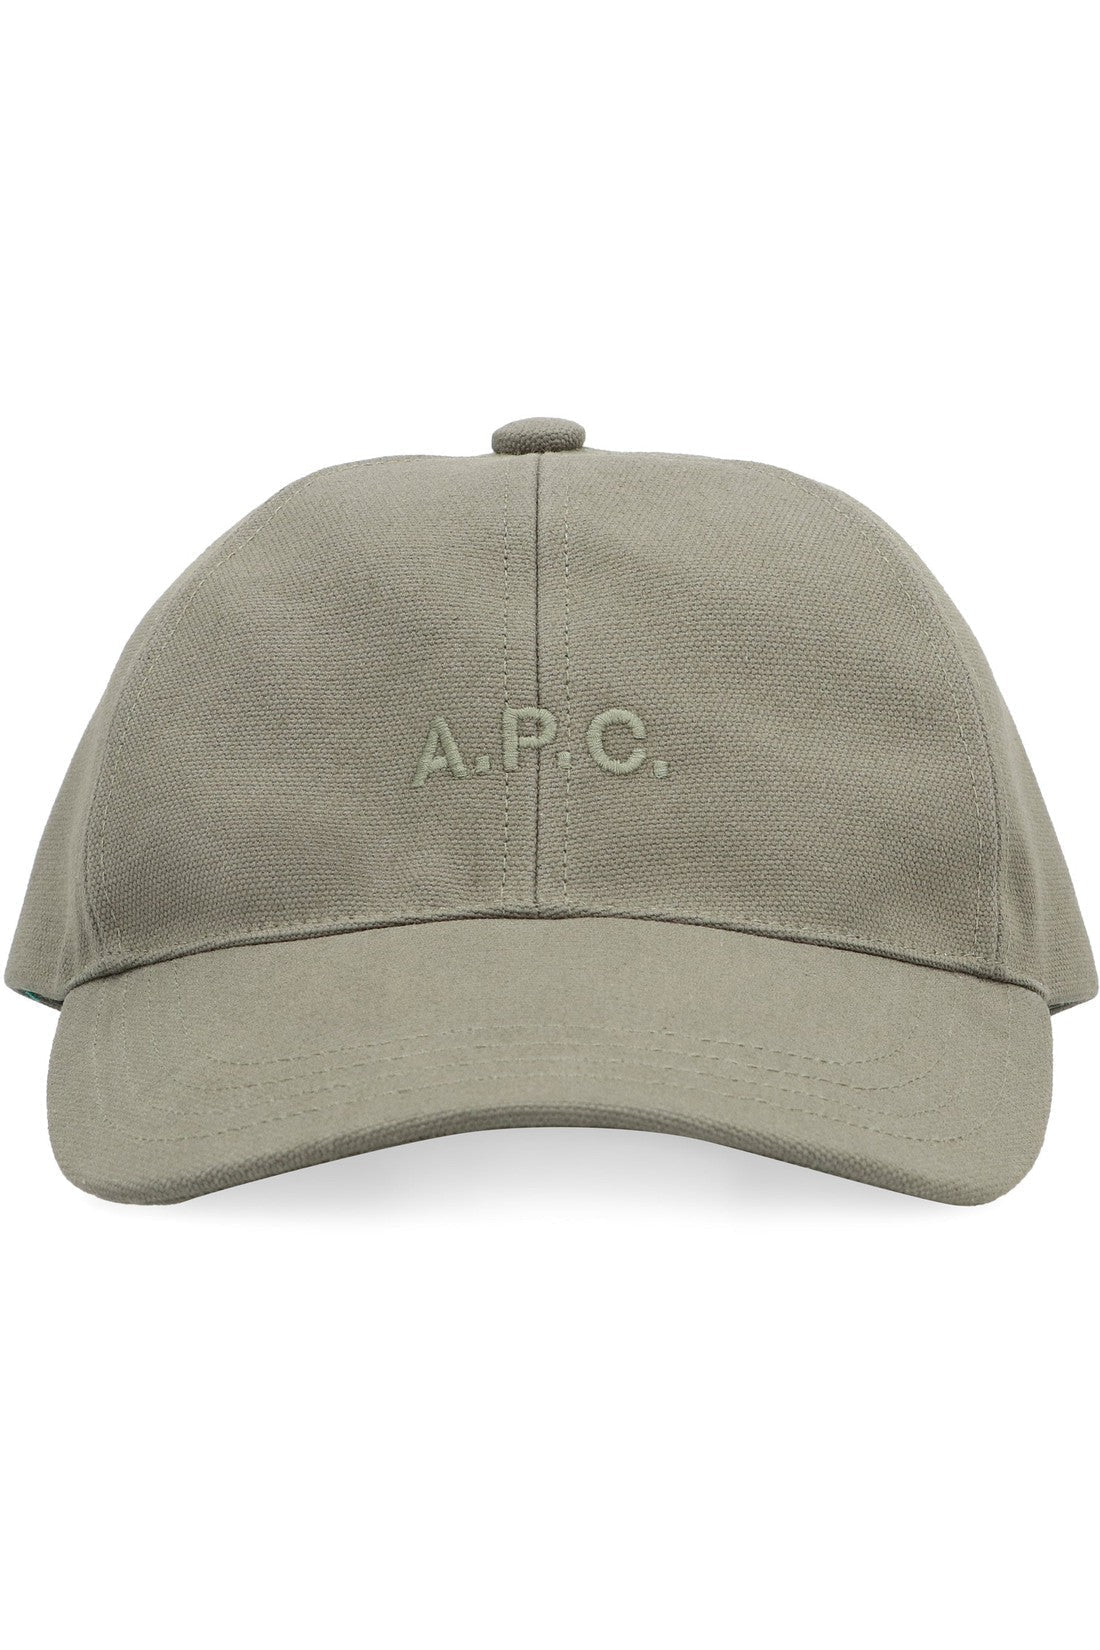 A.P.C.-OUTLET-SALE-Charlie embroidered baseball cap-ARCHIVIST